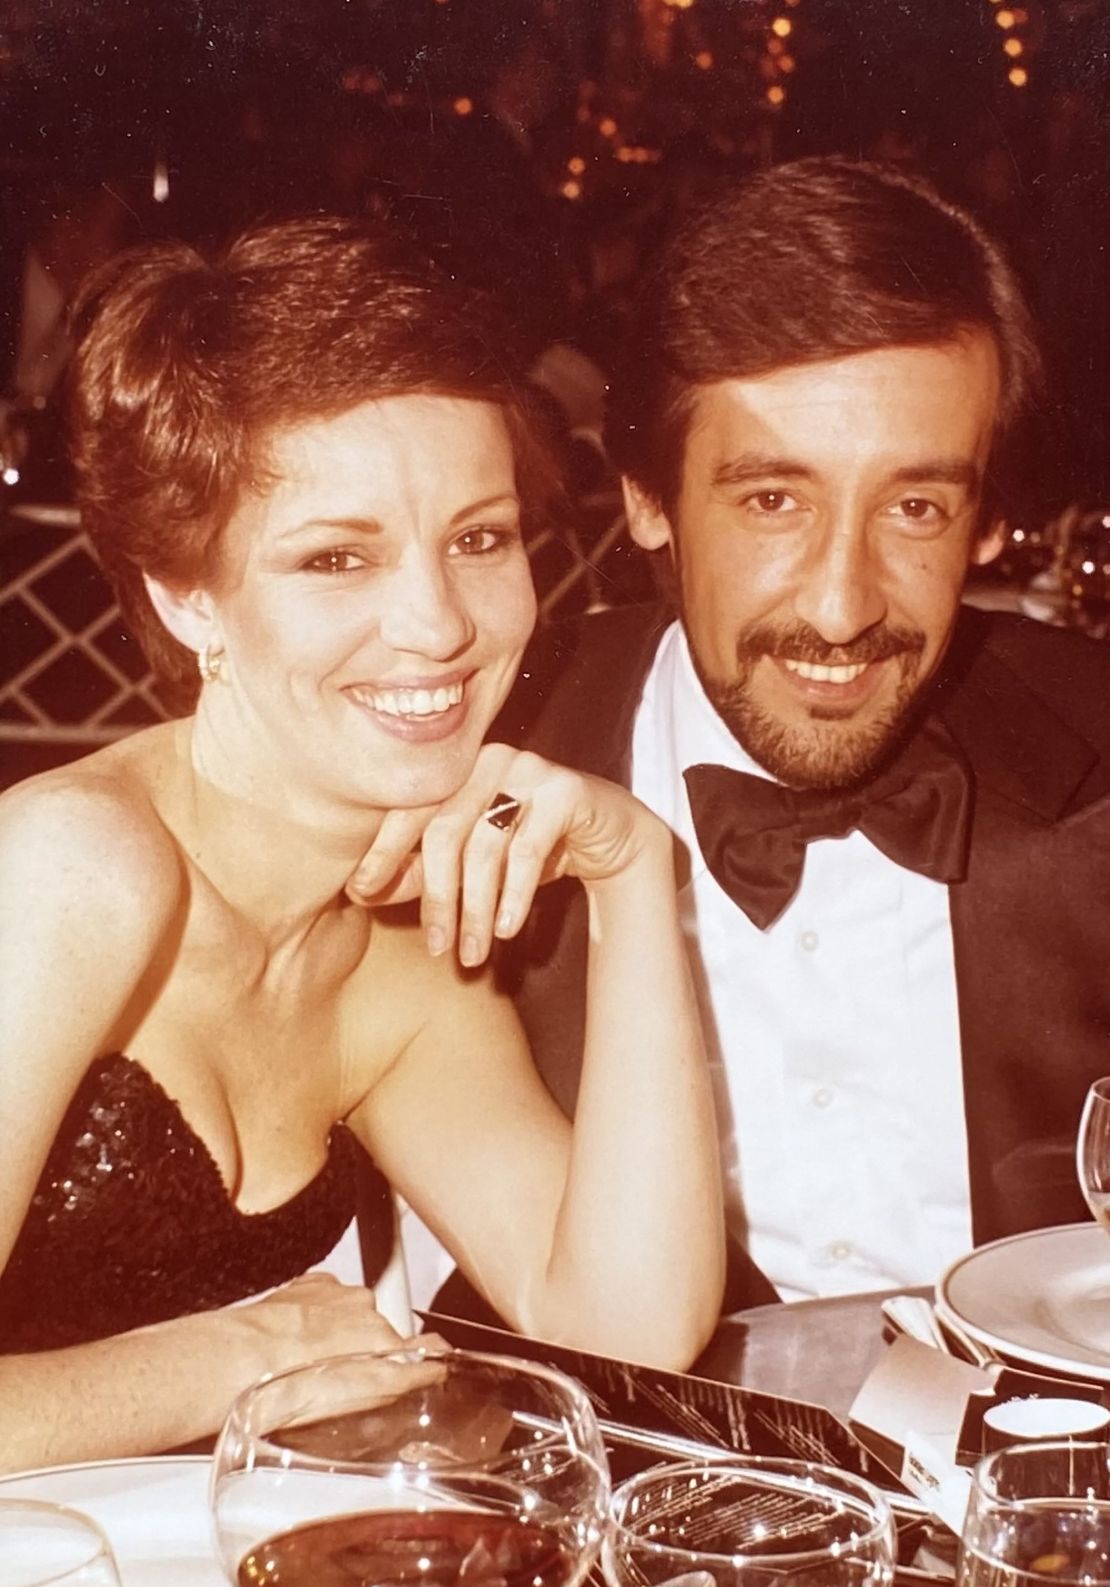 Here's Sally and Stefano in 1979 in Los Angeles, California.